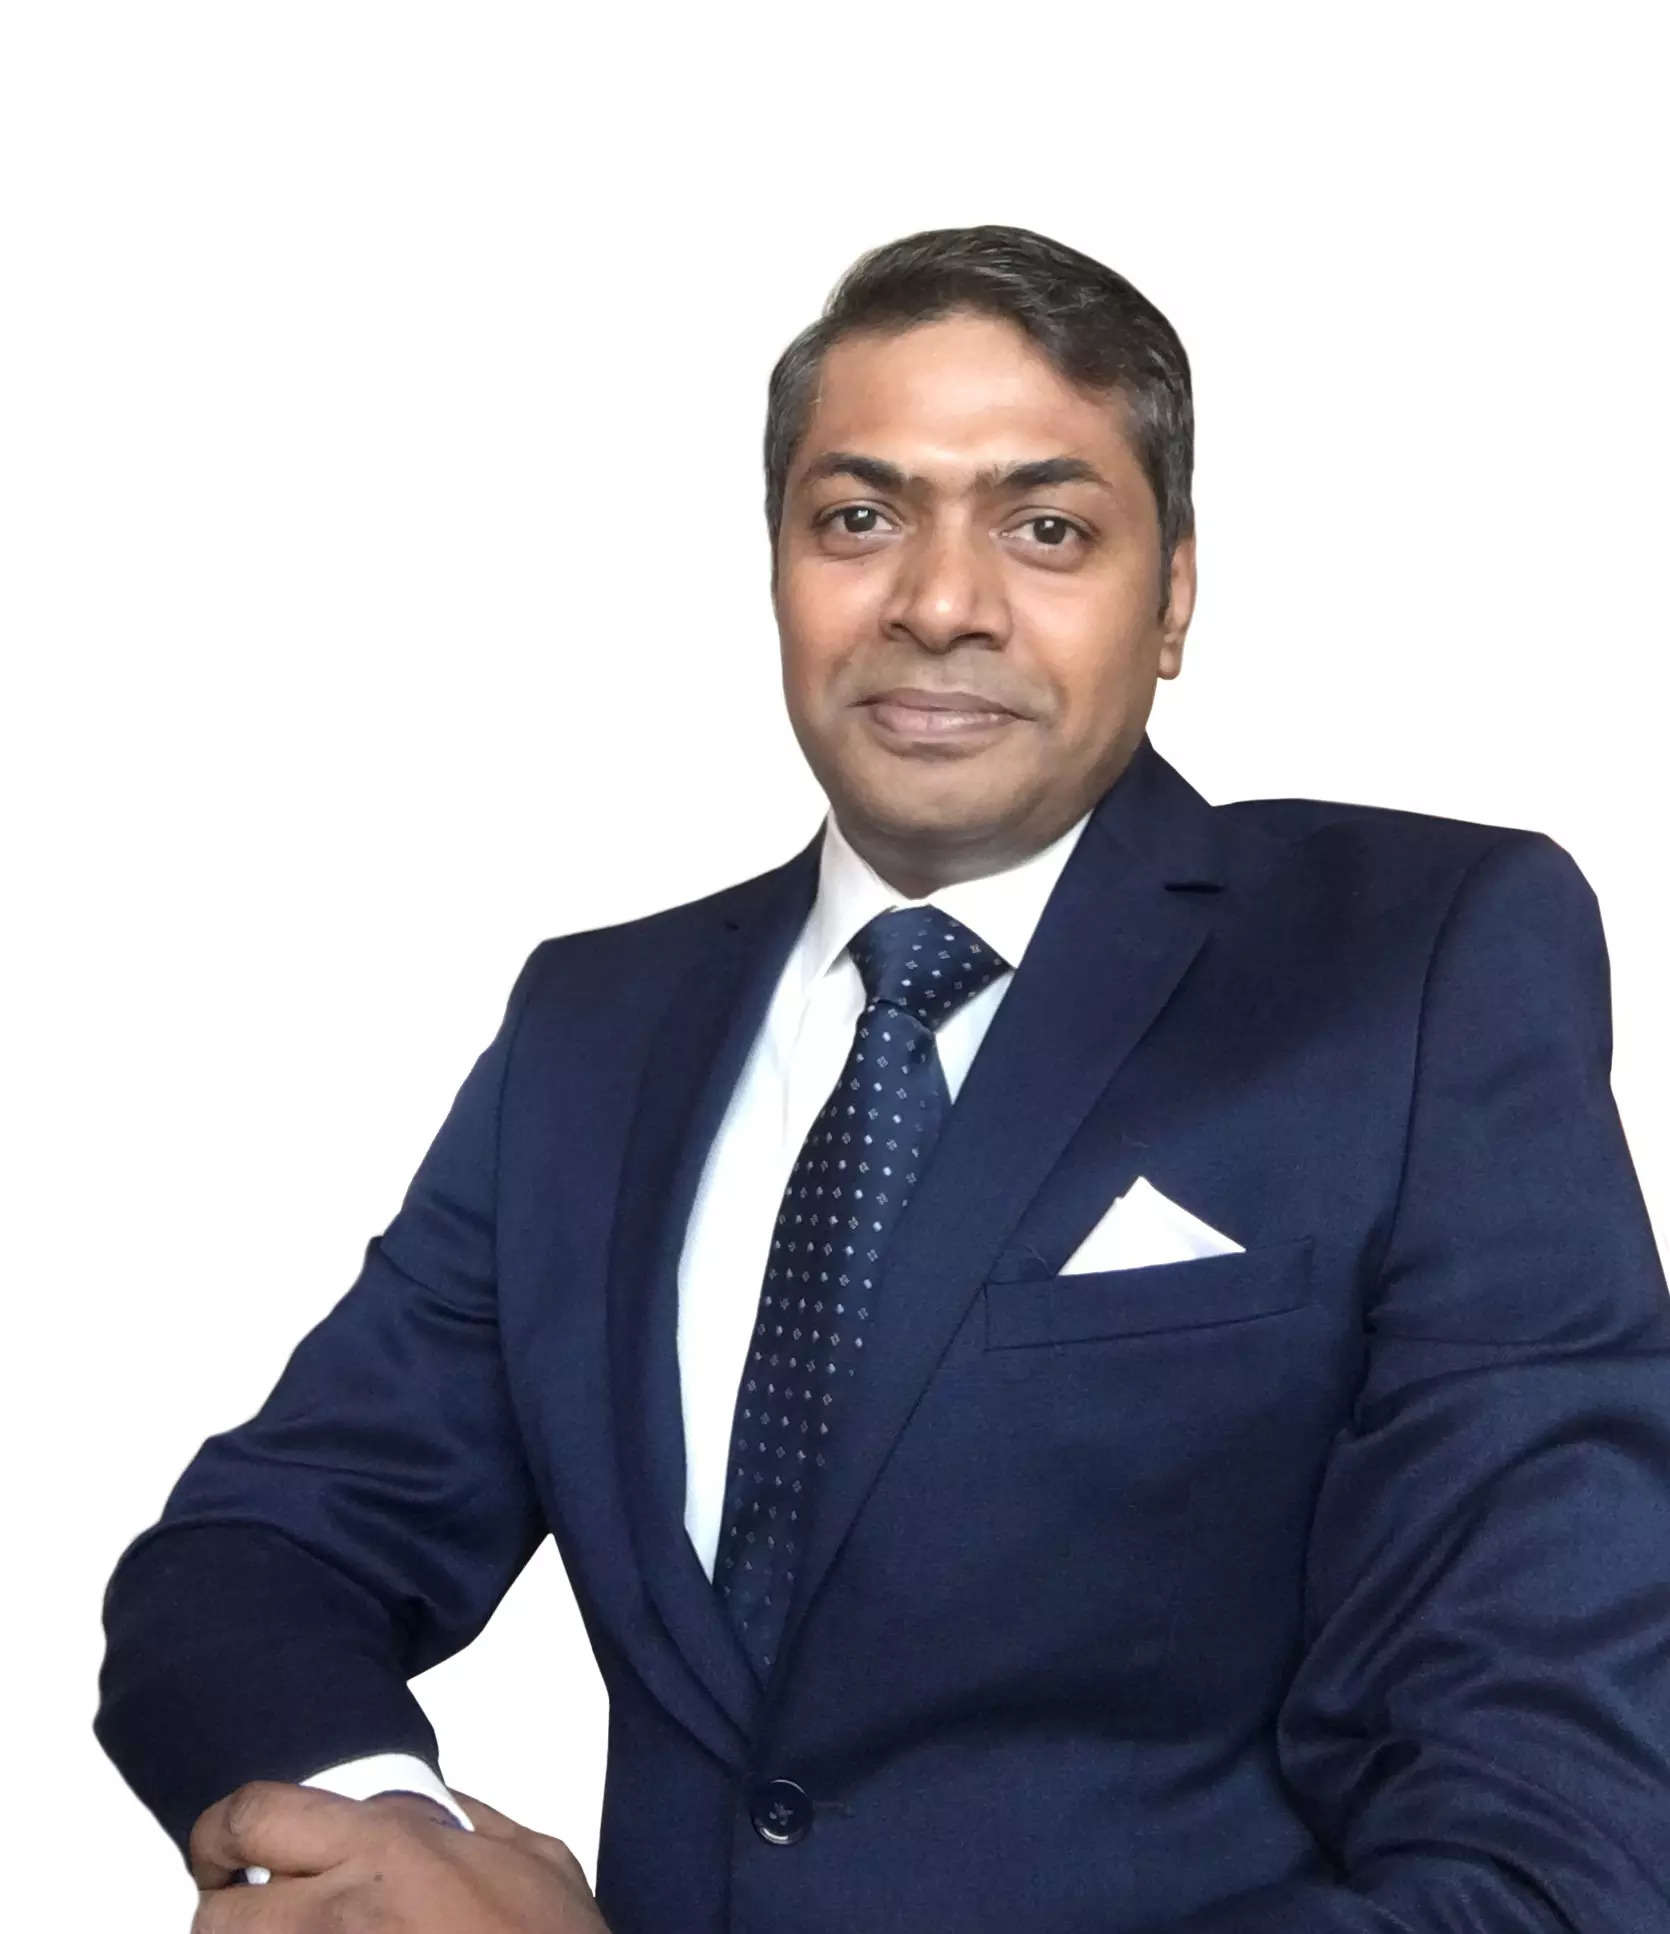 G Ravindran R joins Hogar Controls and SuperSurfaces as vice president of marketing, ET BrandEquity